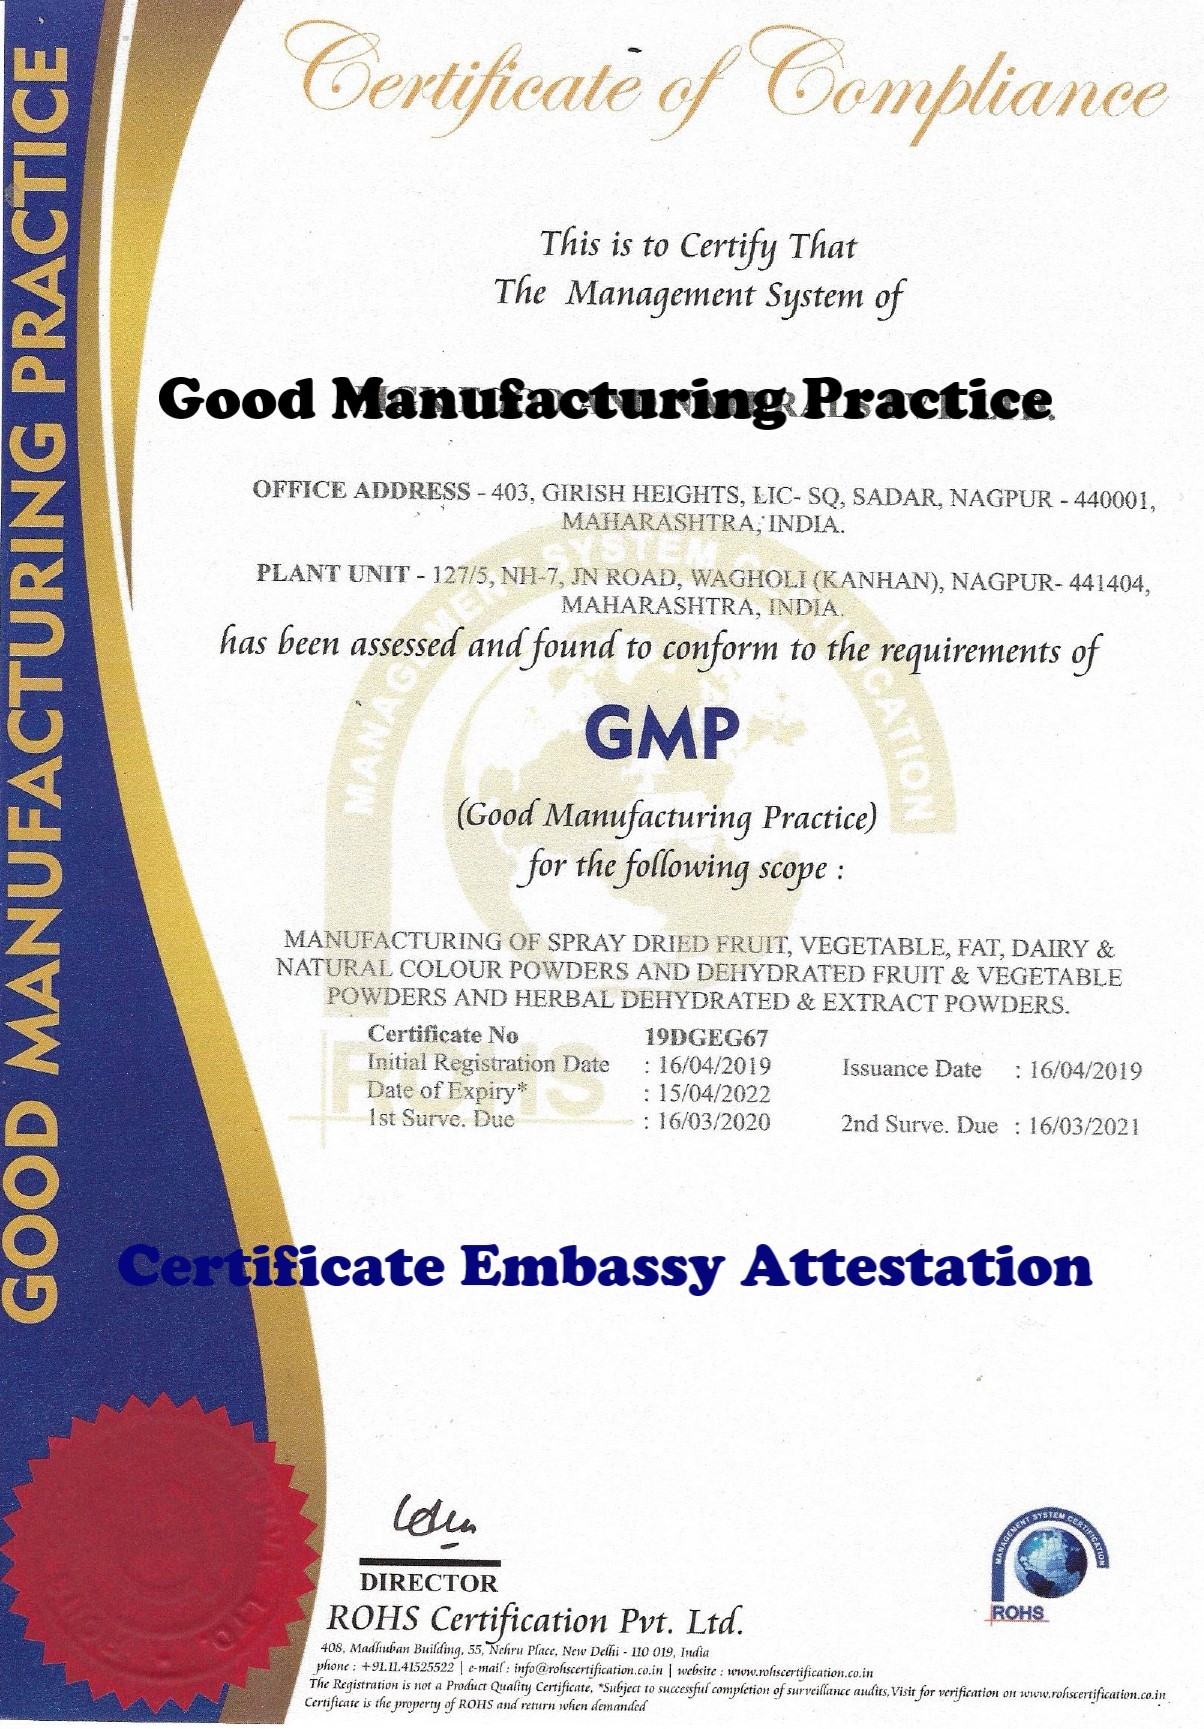 GMP Certificate Attestation from China Embassy